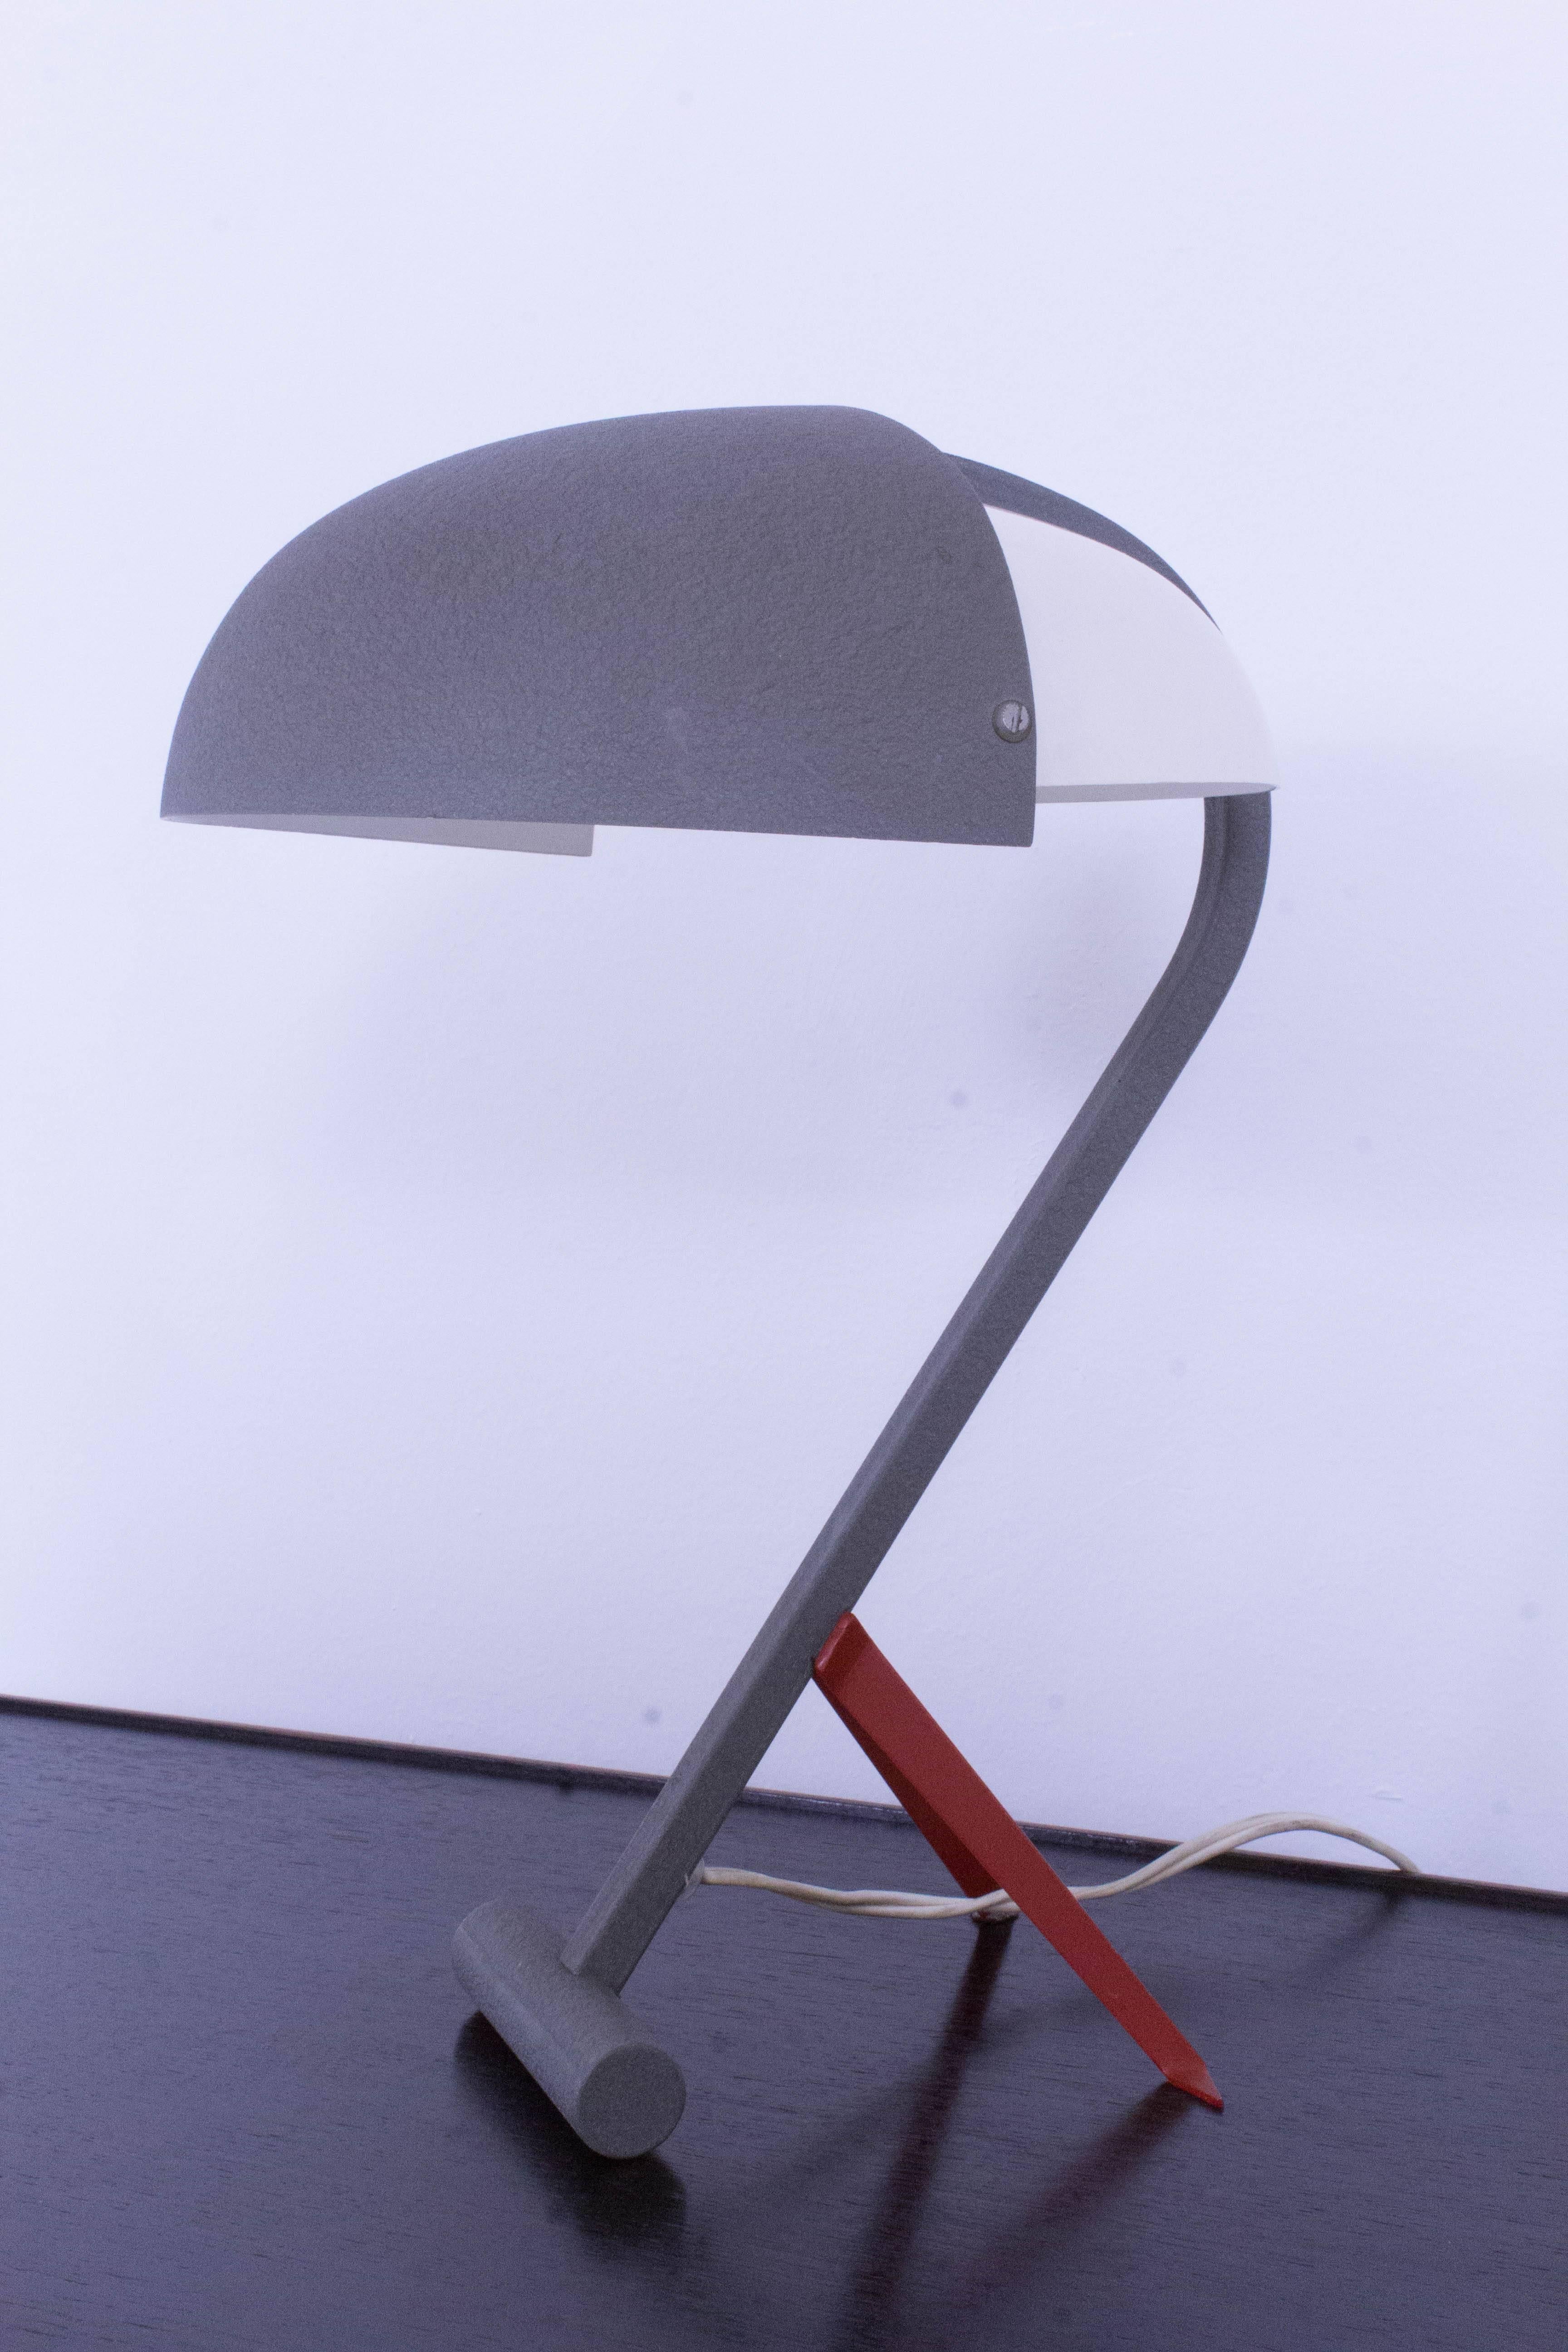 Stunning Mid-Century Modern desk lamp by Louis Kalff for Philips, 1950s.
Model: NX110.
Iconic design and marked with manufacturers sticker.
In good original condition with minor wear consistent with age and use,
preserving a beautiful patina.